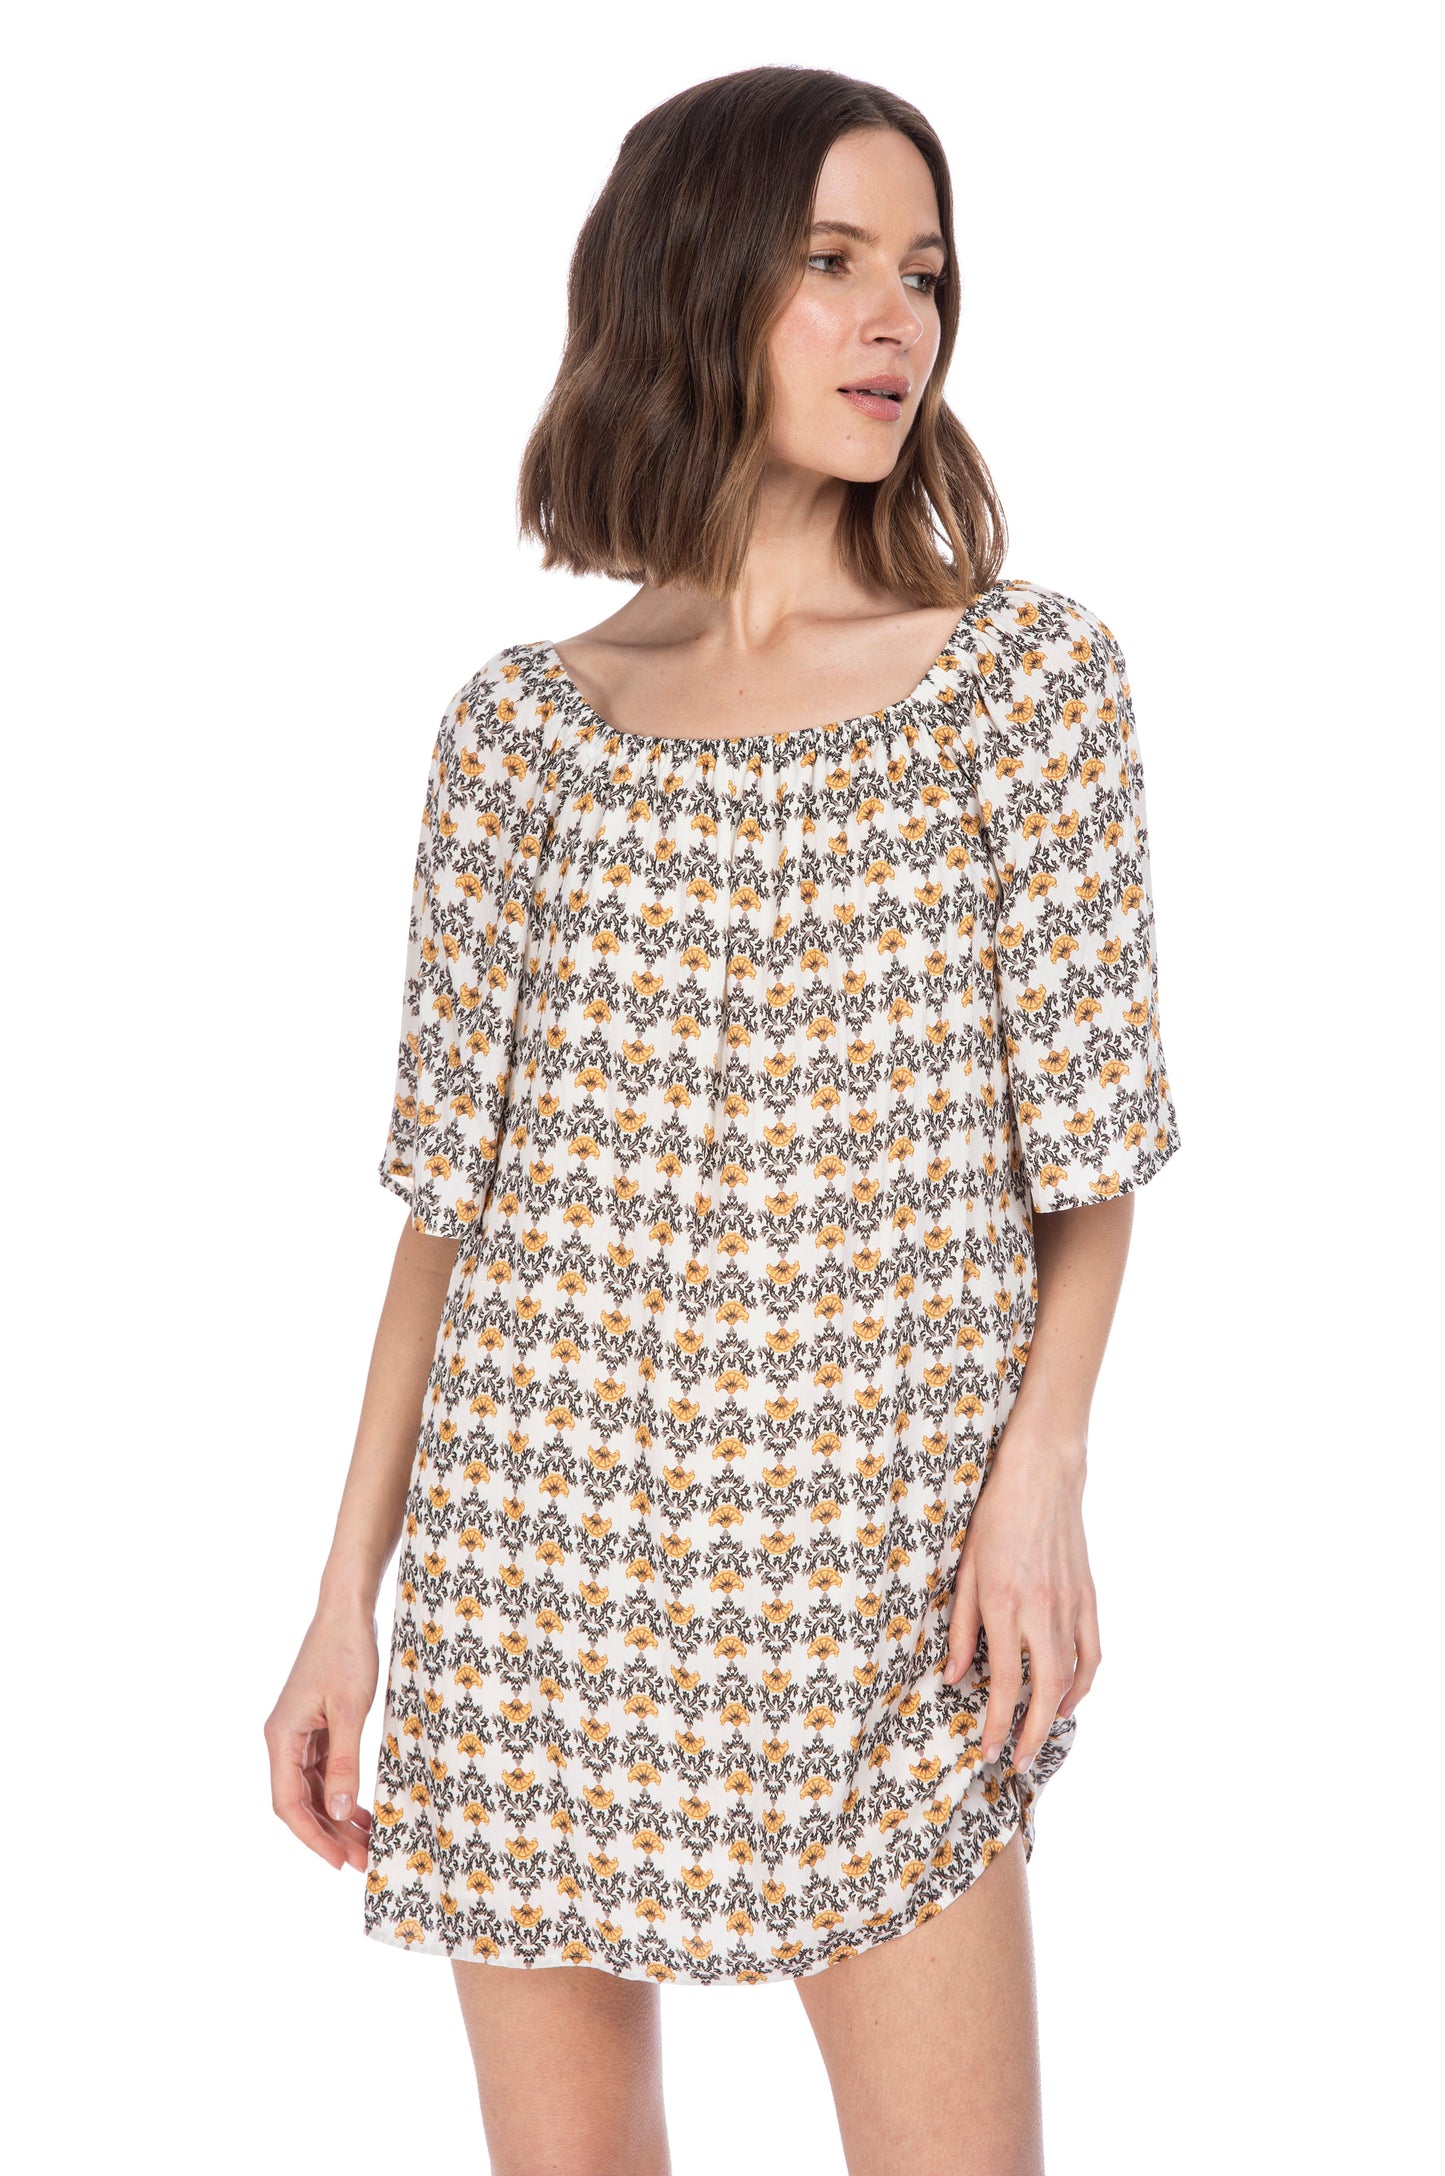 A woman in a versatile floral print dress with an off shoulder design and short sleeves, posing against a white background, wearing the ELBOW SLV SHIFT DRESS by B Collection by Bobeau.